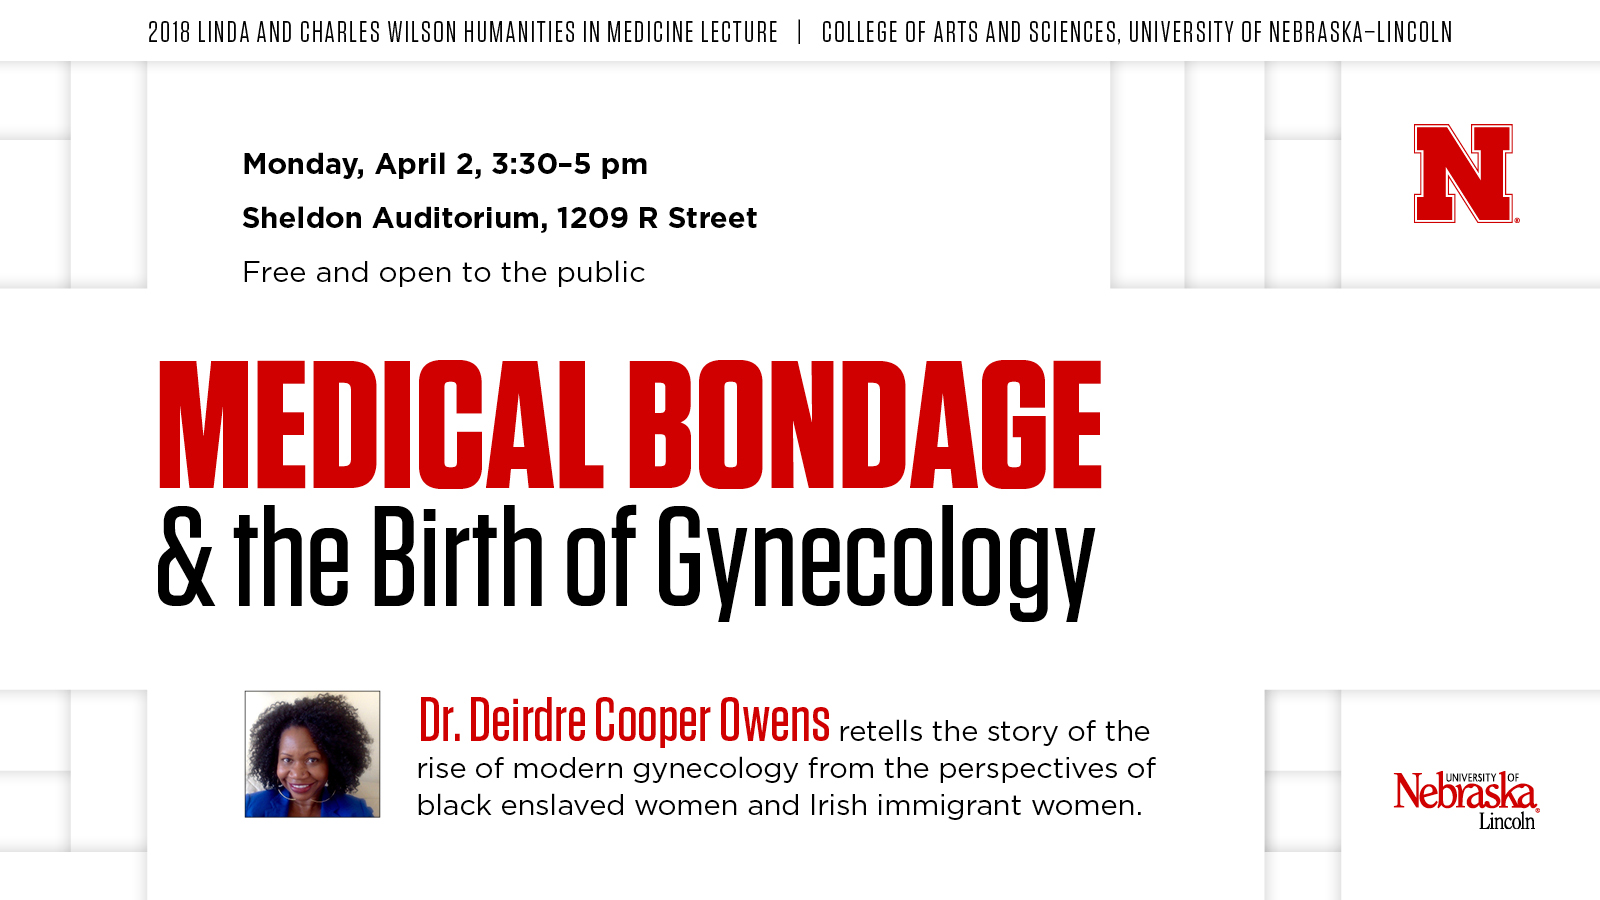 MEDICAL BONDAGE & the Birth of Gynecology is April 2